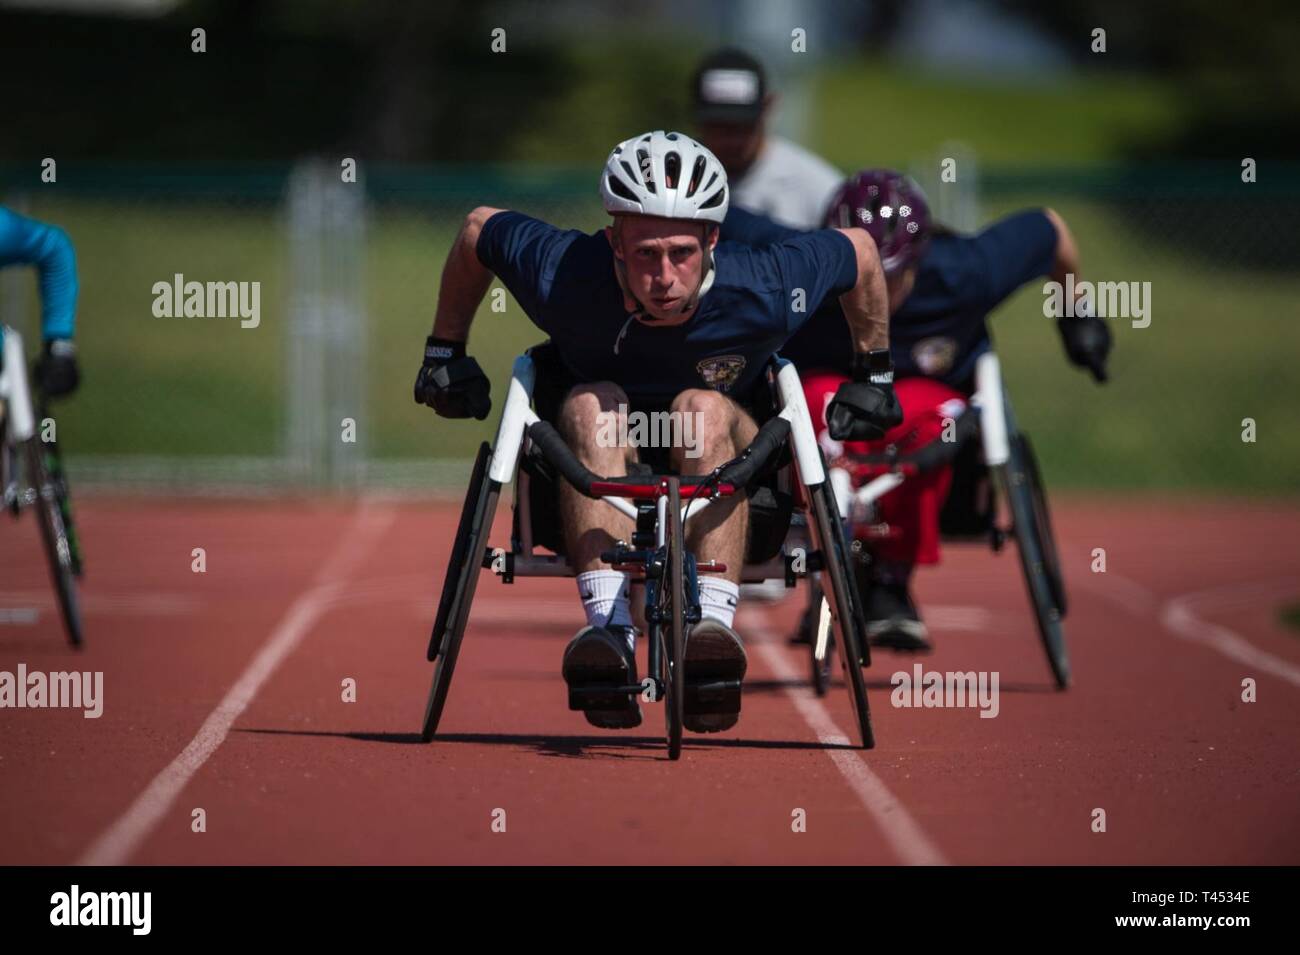 MARINE CORPS BASE CAMP PENDLETON, CALIFORNIA – A U.S. Marine Corps athlete races to the finish during the 2019 Marine Corps Trials at Marine Corps Base Camp Pendleton, California, Feb. 27. The Marine Corps Trials promotes recovery and rehabilitation through adaptive sports participation and develops camaraderie among recovering service members and veterans. Additionally, the competition is an opportunity for participants to demonstrate physical and mental achievements and serves as the primary venue to select Marine Corps participants for the DoD Warrior Games. (Official U.S. Marine Corps Stock Photo